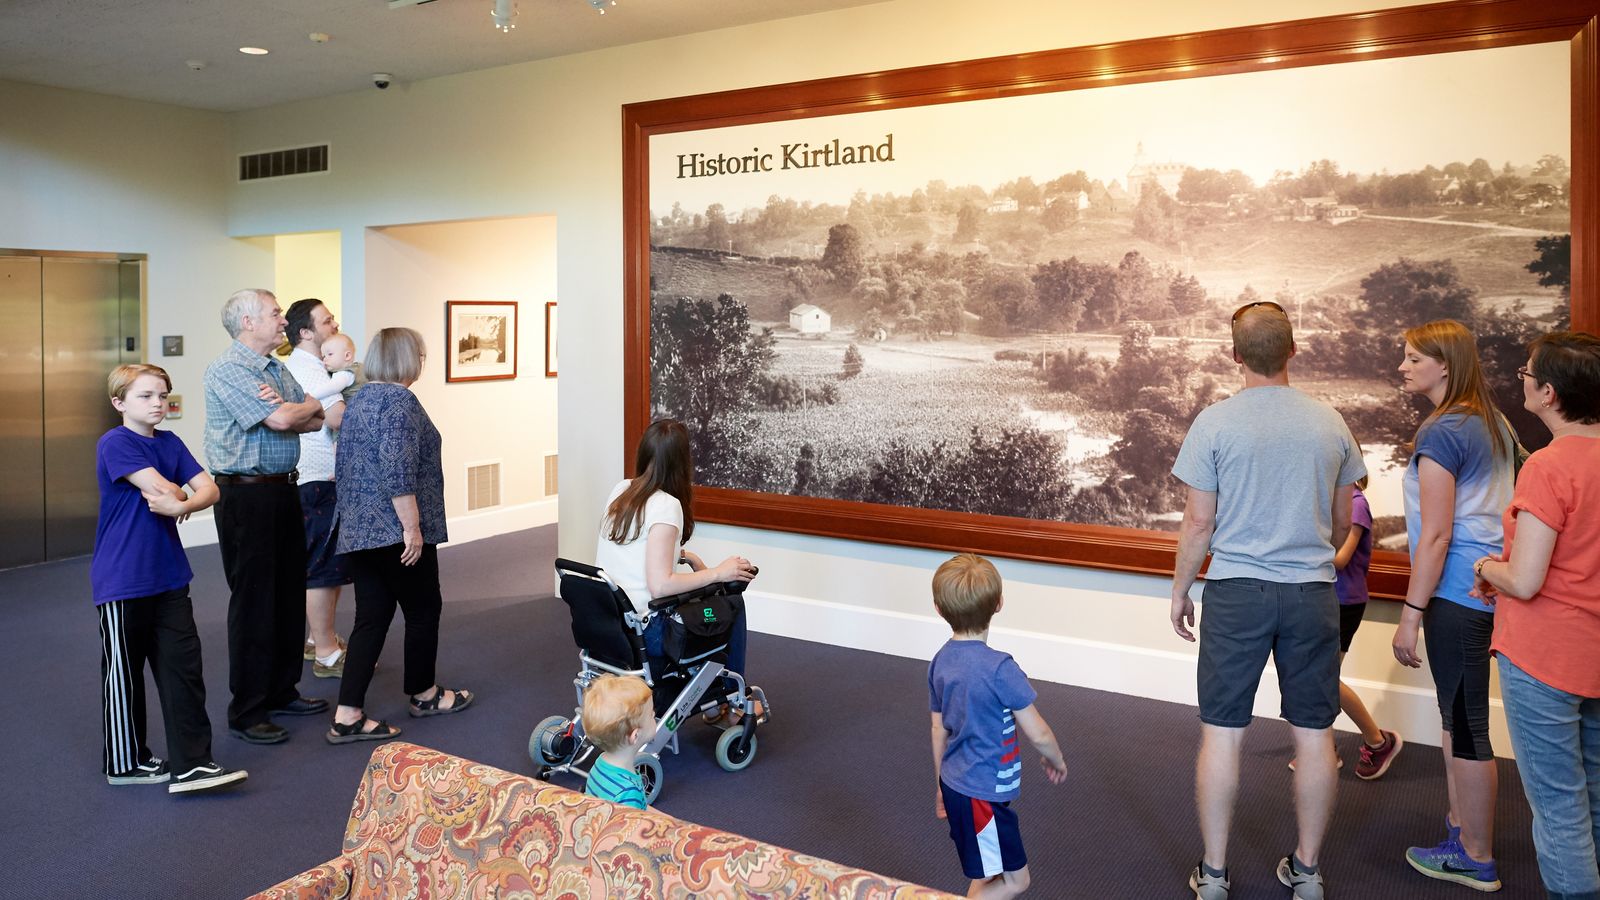 A group of people look at a large black and white photo on a wall depicting a landscape that has the words Historic Kirtland in the top left-hand corner.